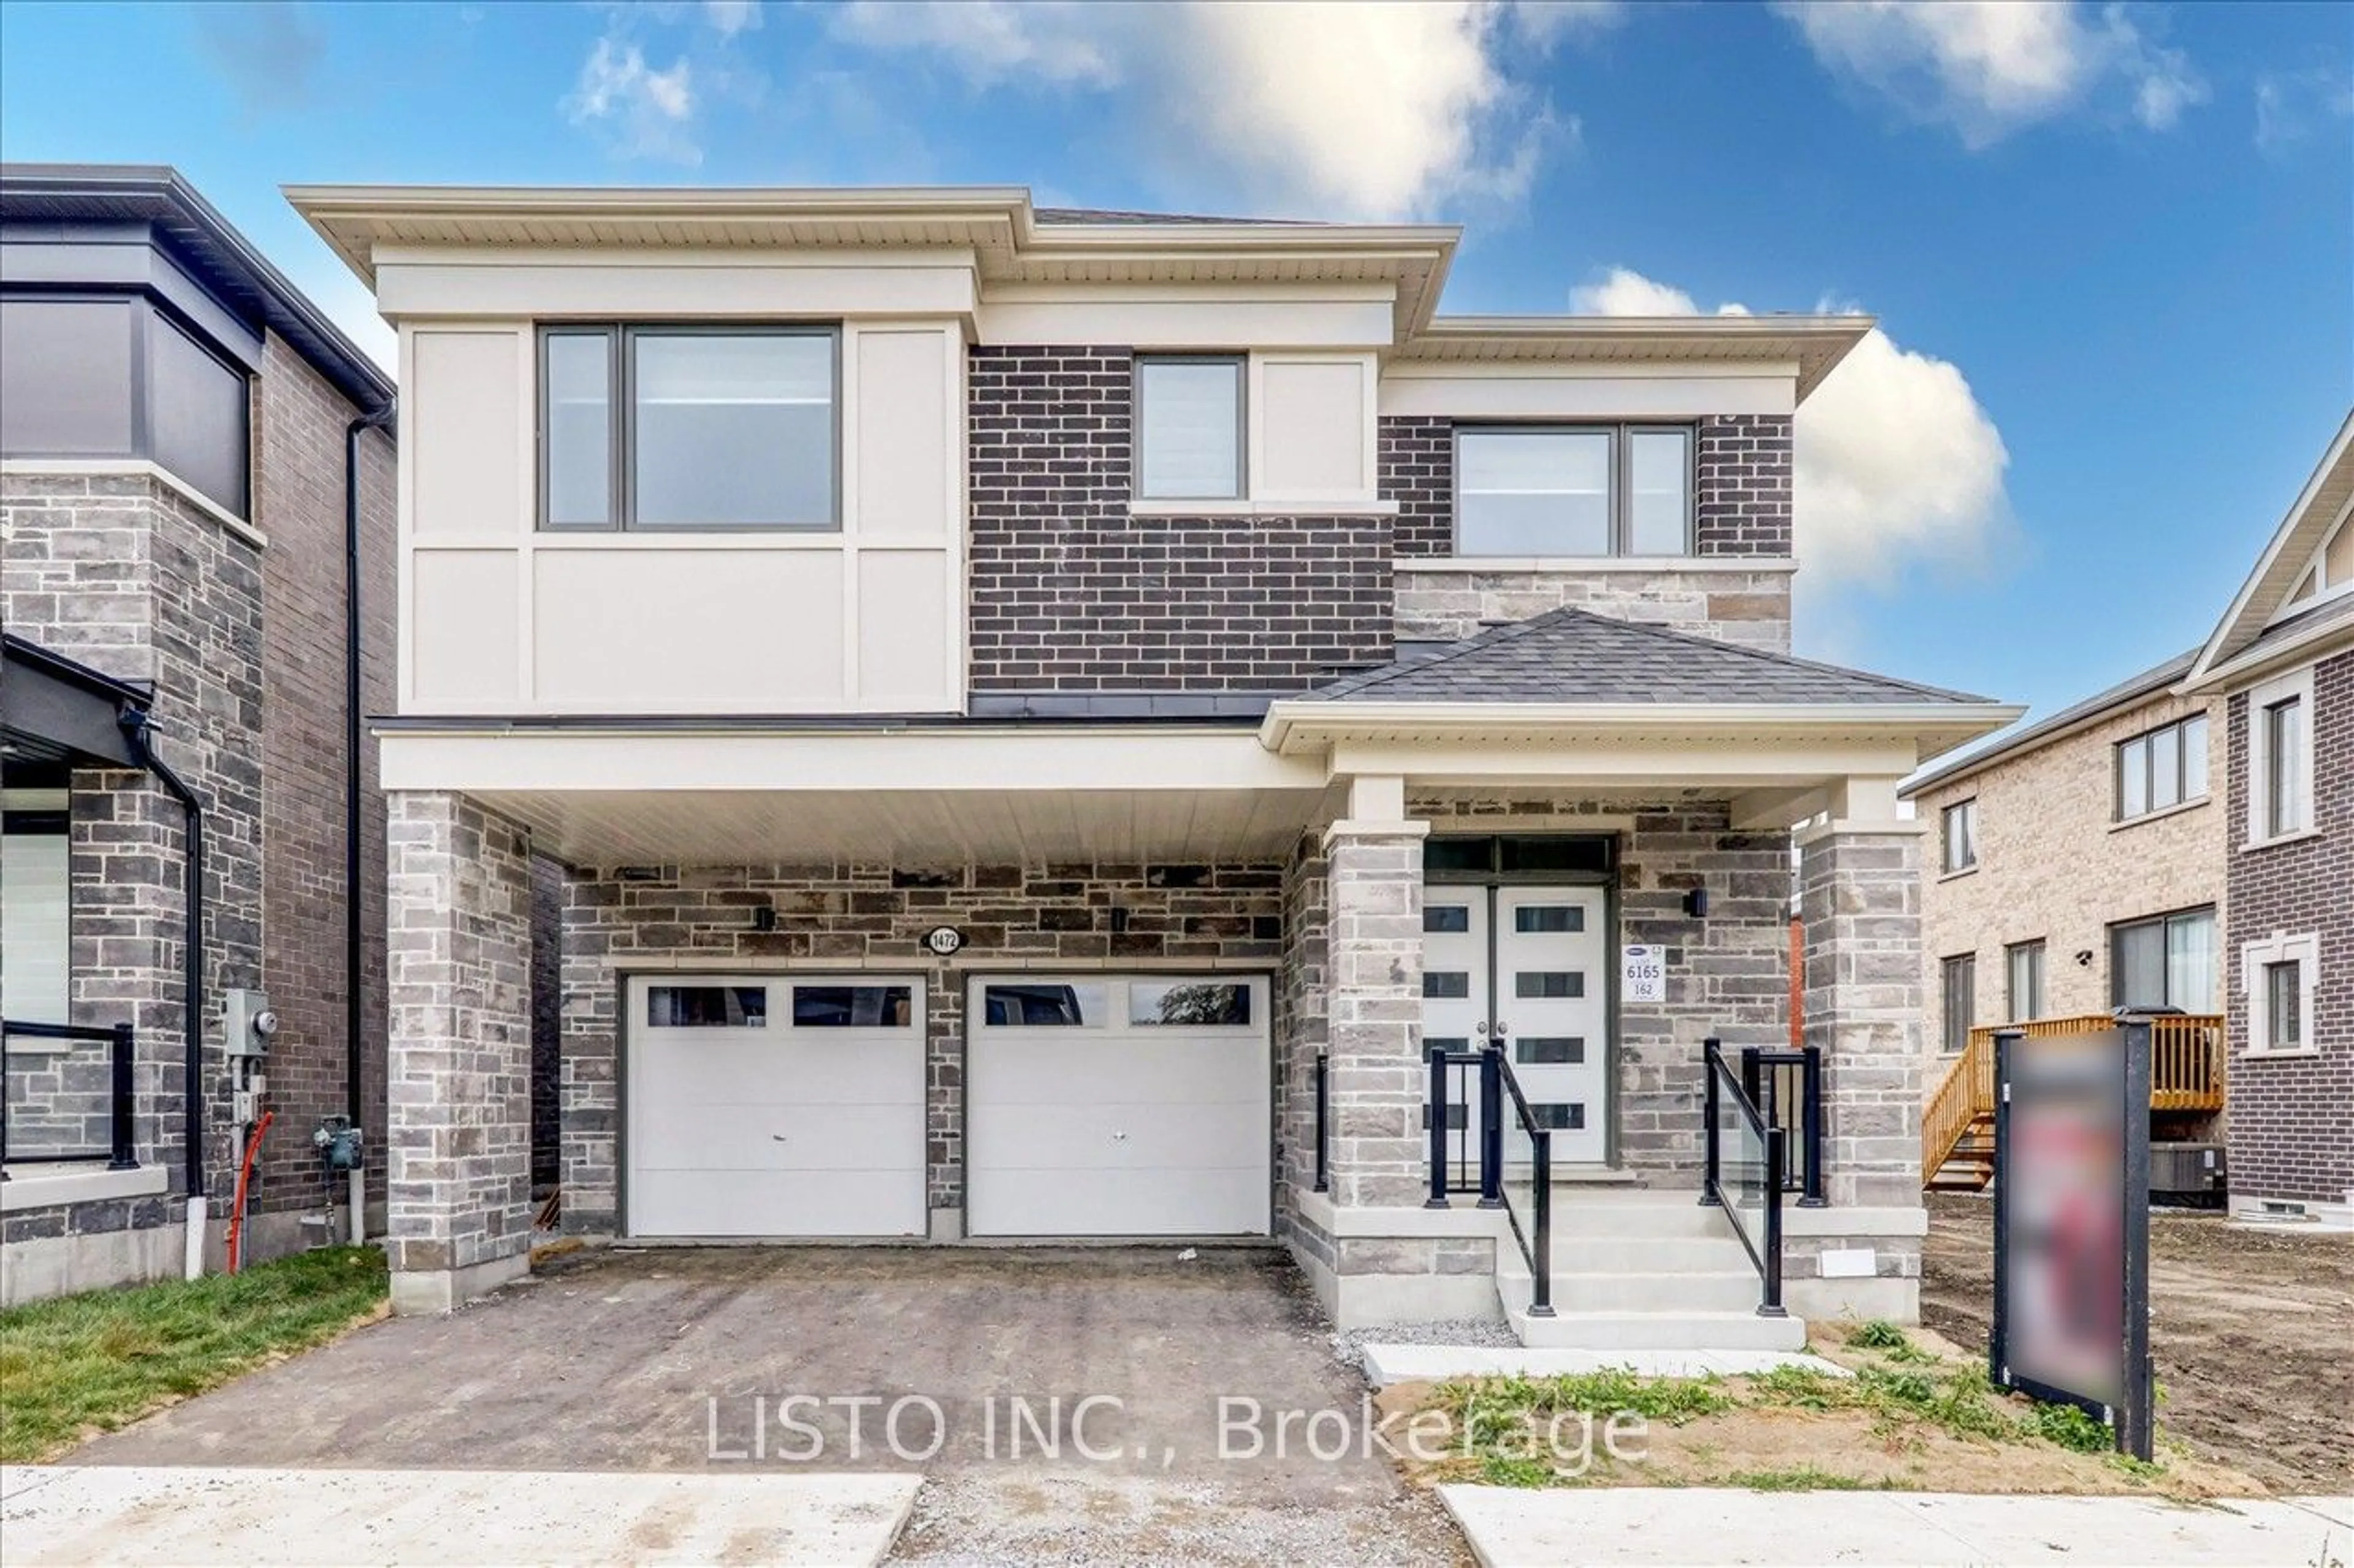 Home with brick exterior material for 1472 Skybird Lane, Pickering Ontario L1X 0N2